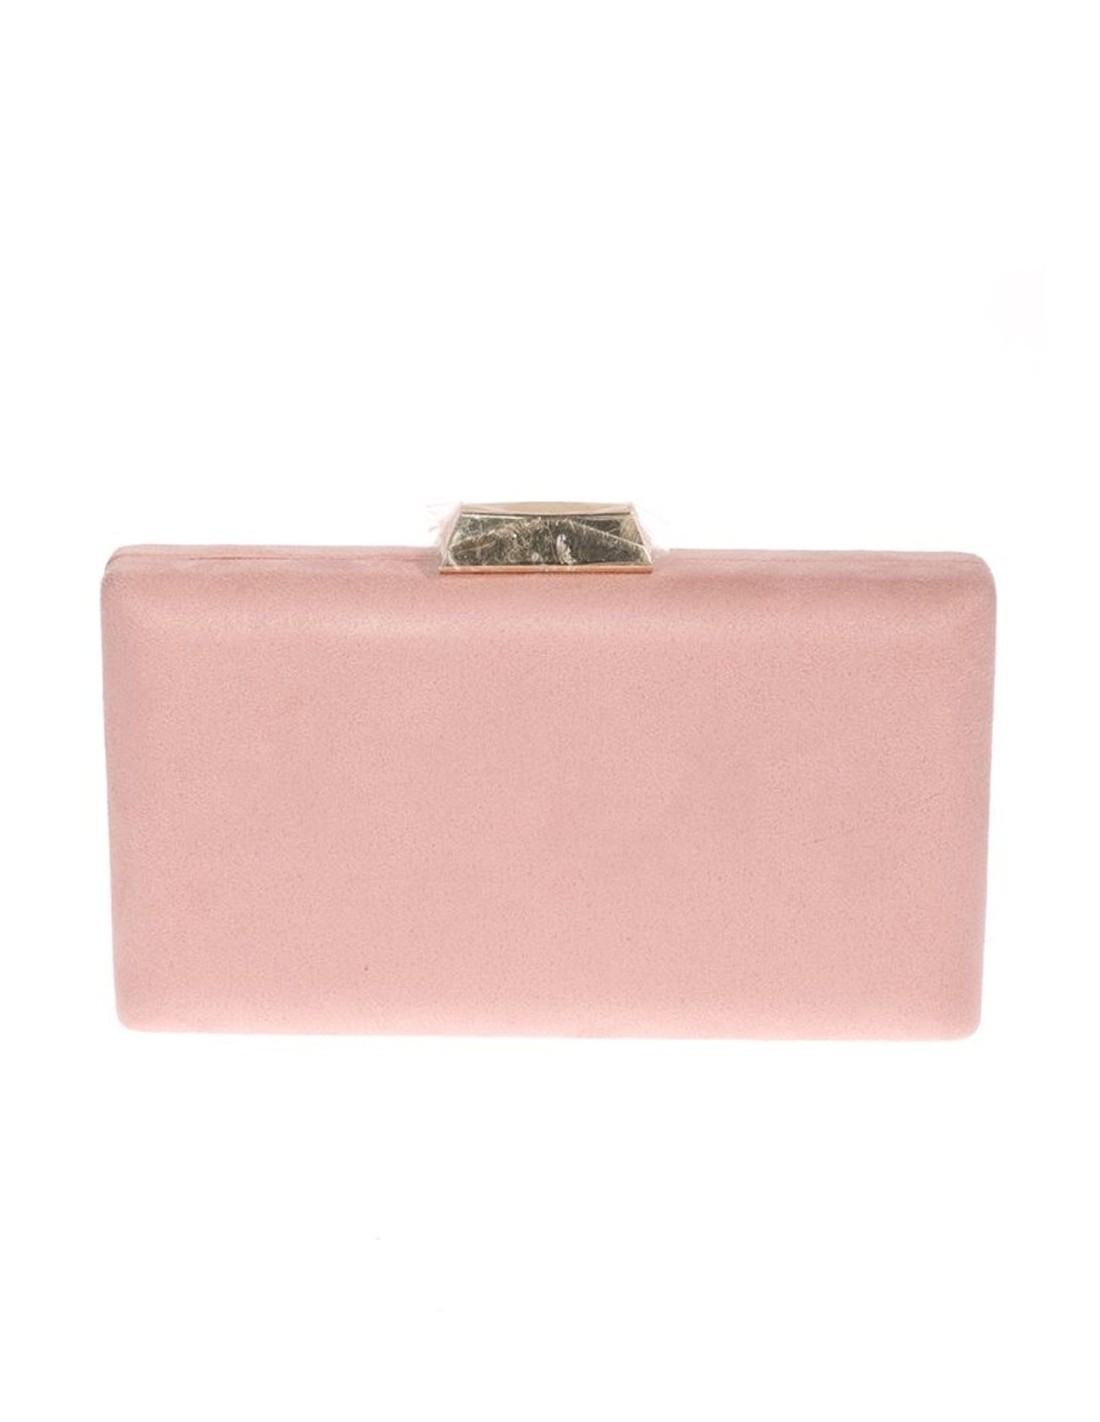 suede clutch bag in baby pink perfect for wedding guest | INVITADISIMA